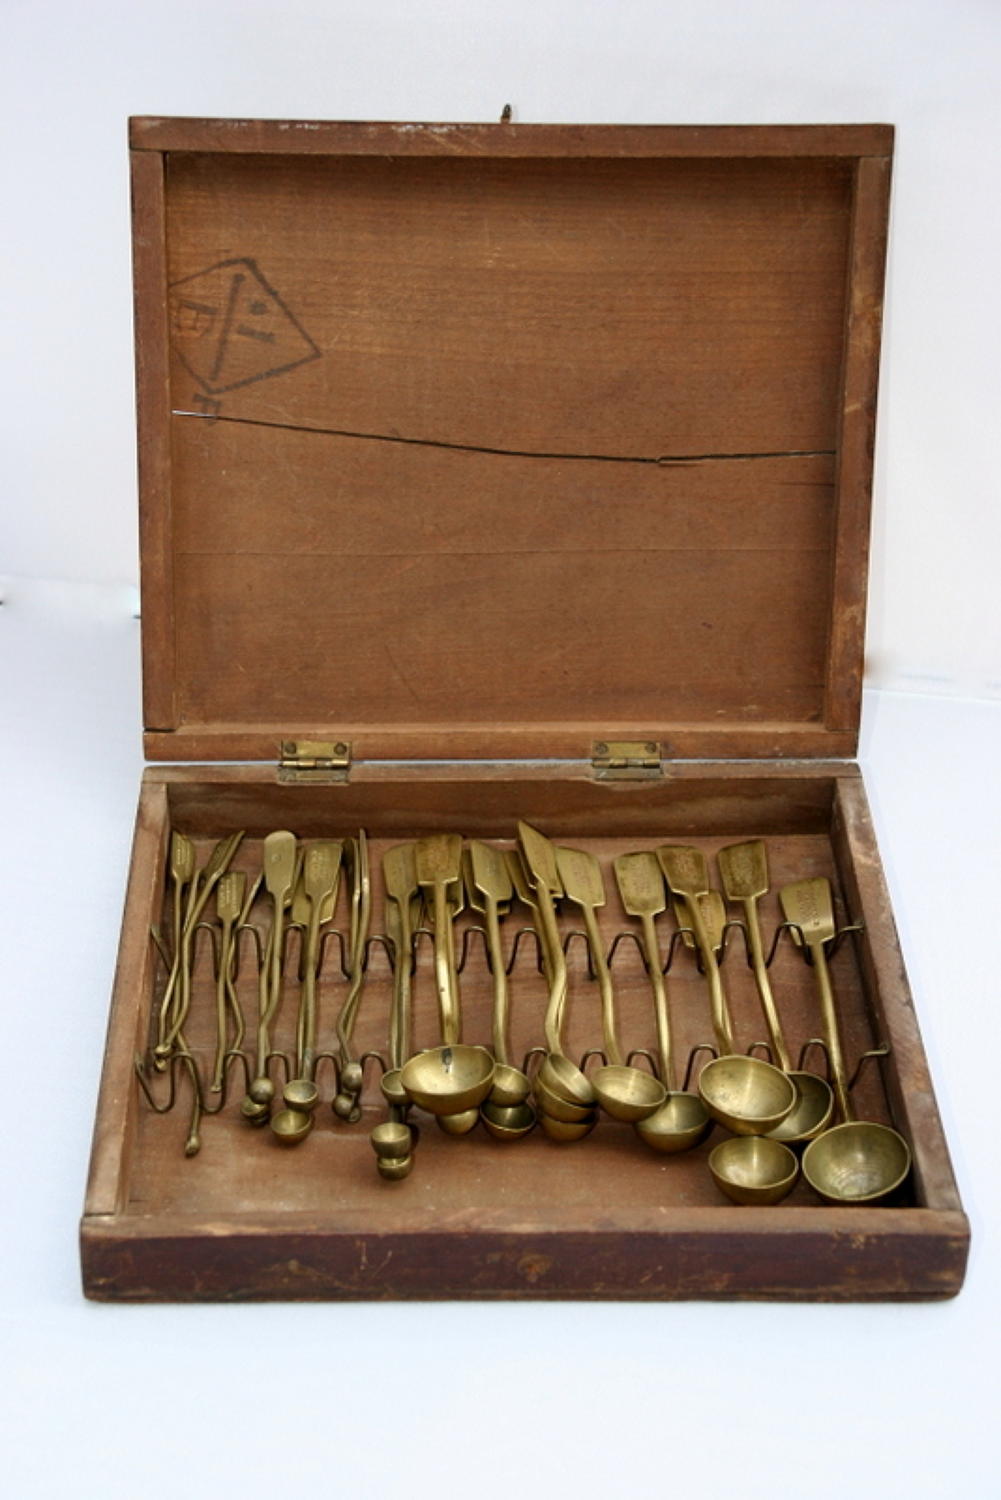 Boxed set of Seed Spoons for horticultural suppliers